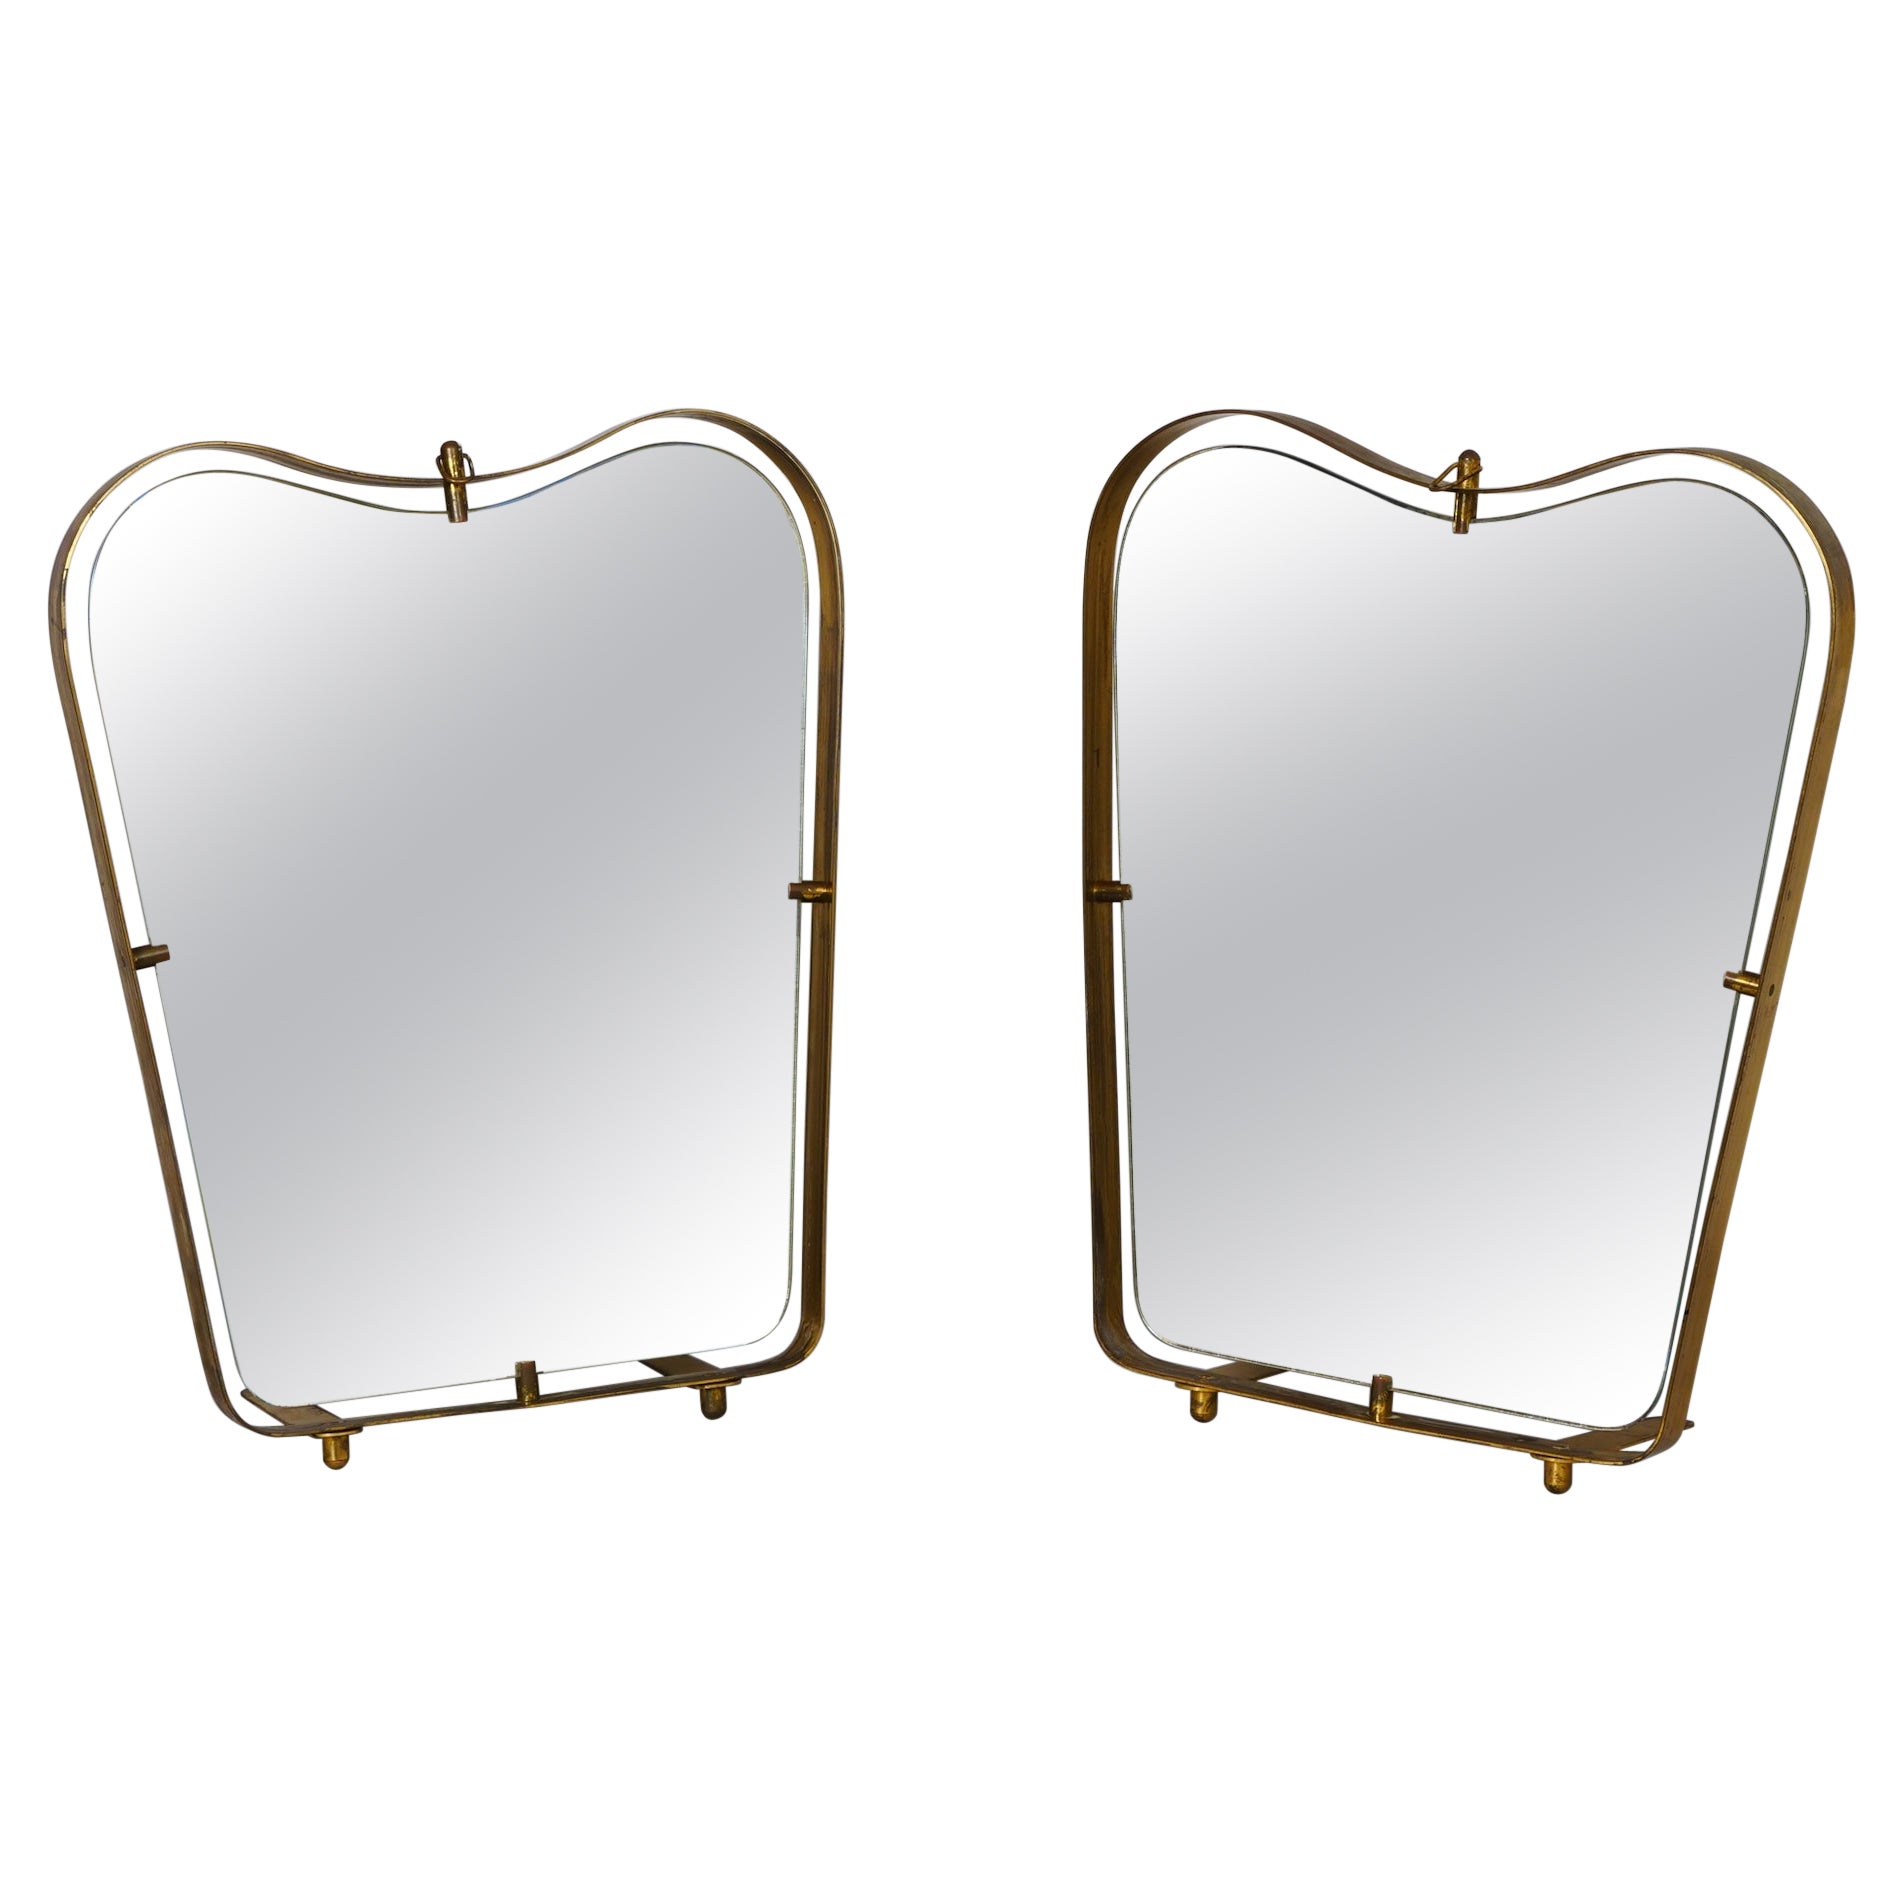 Two Gio Ponti shape Fontana Arte table or wall mirrors Italy c1950  For Sale